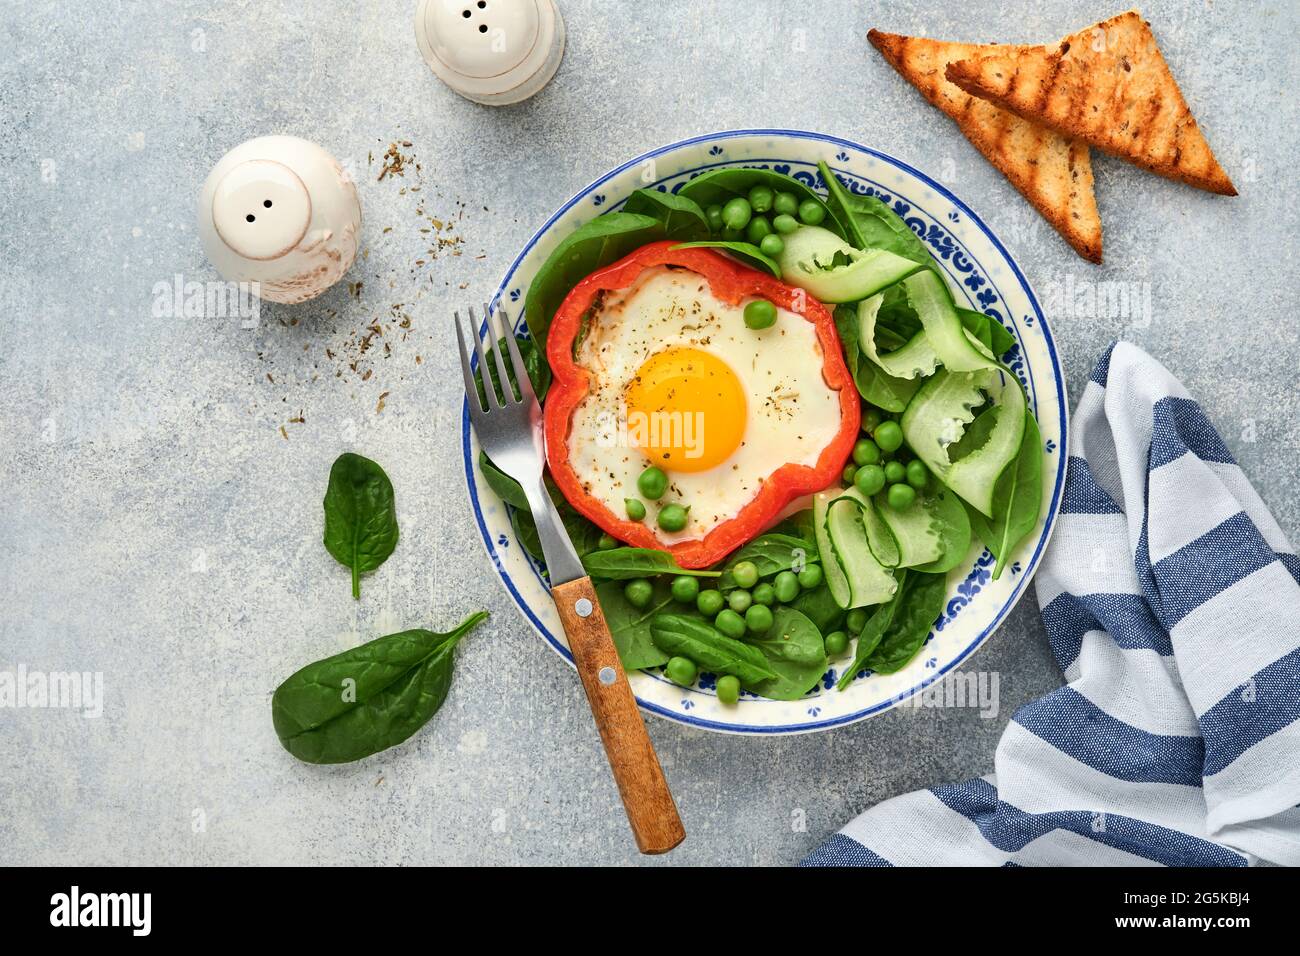 Red bell peppers stuffed with eggs, spinach leaves, green peas and microgreens on a breakfast plate on light grey table background. Top view. Stock Photo